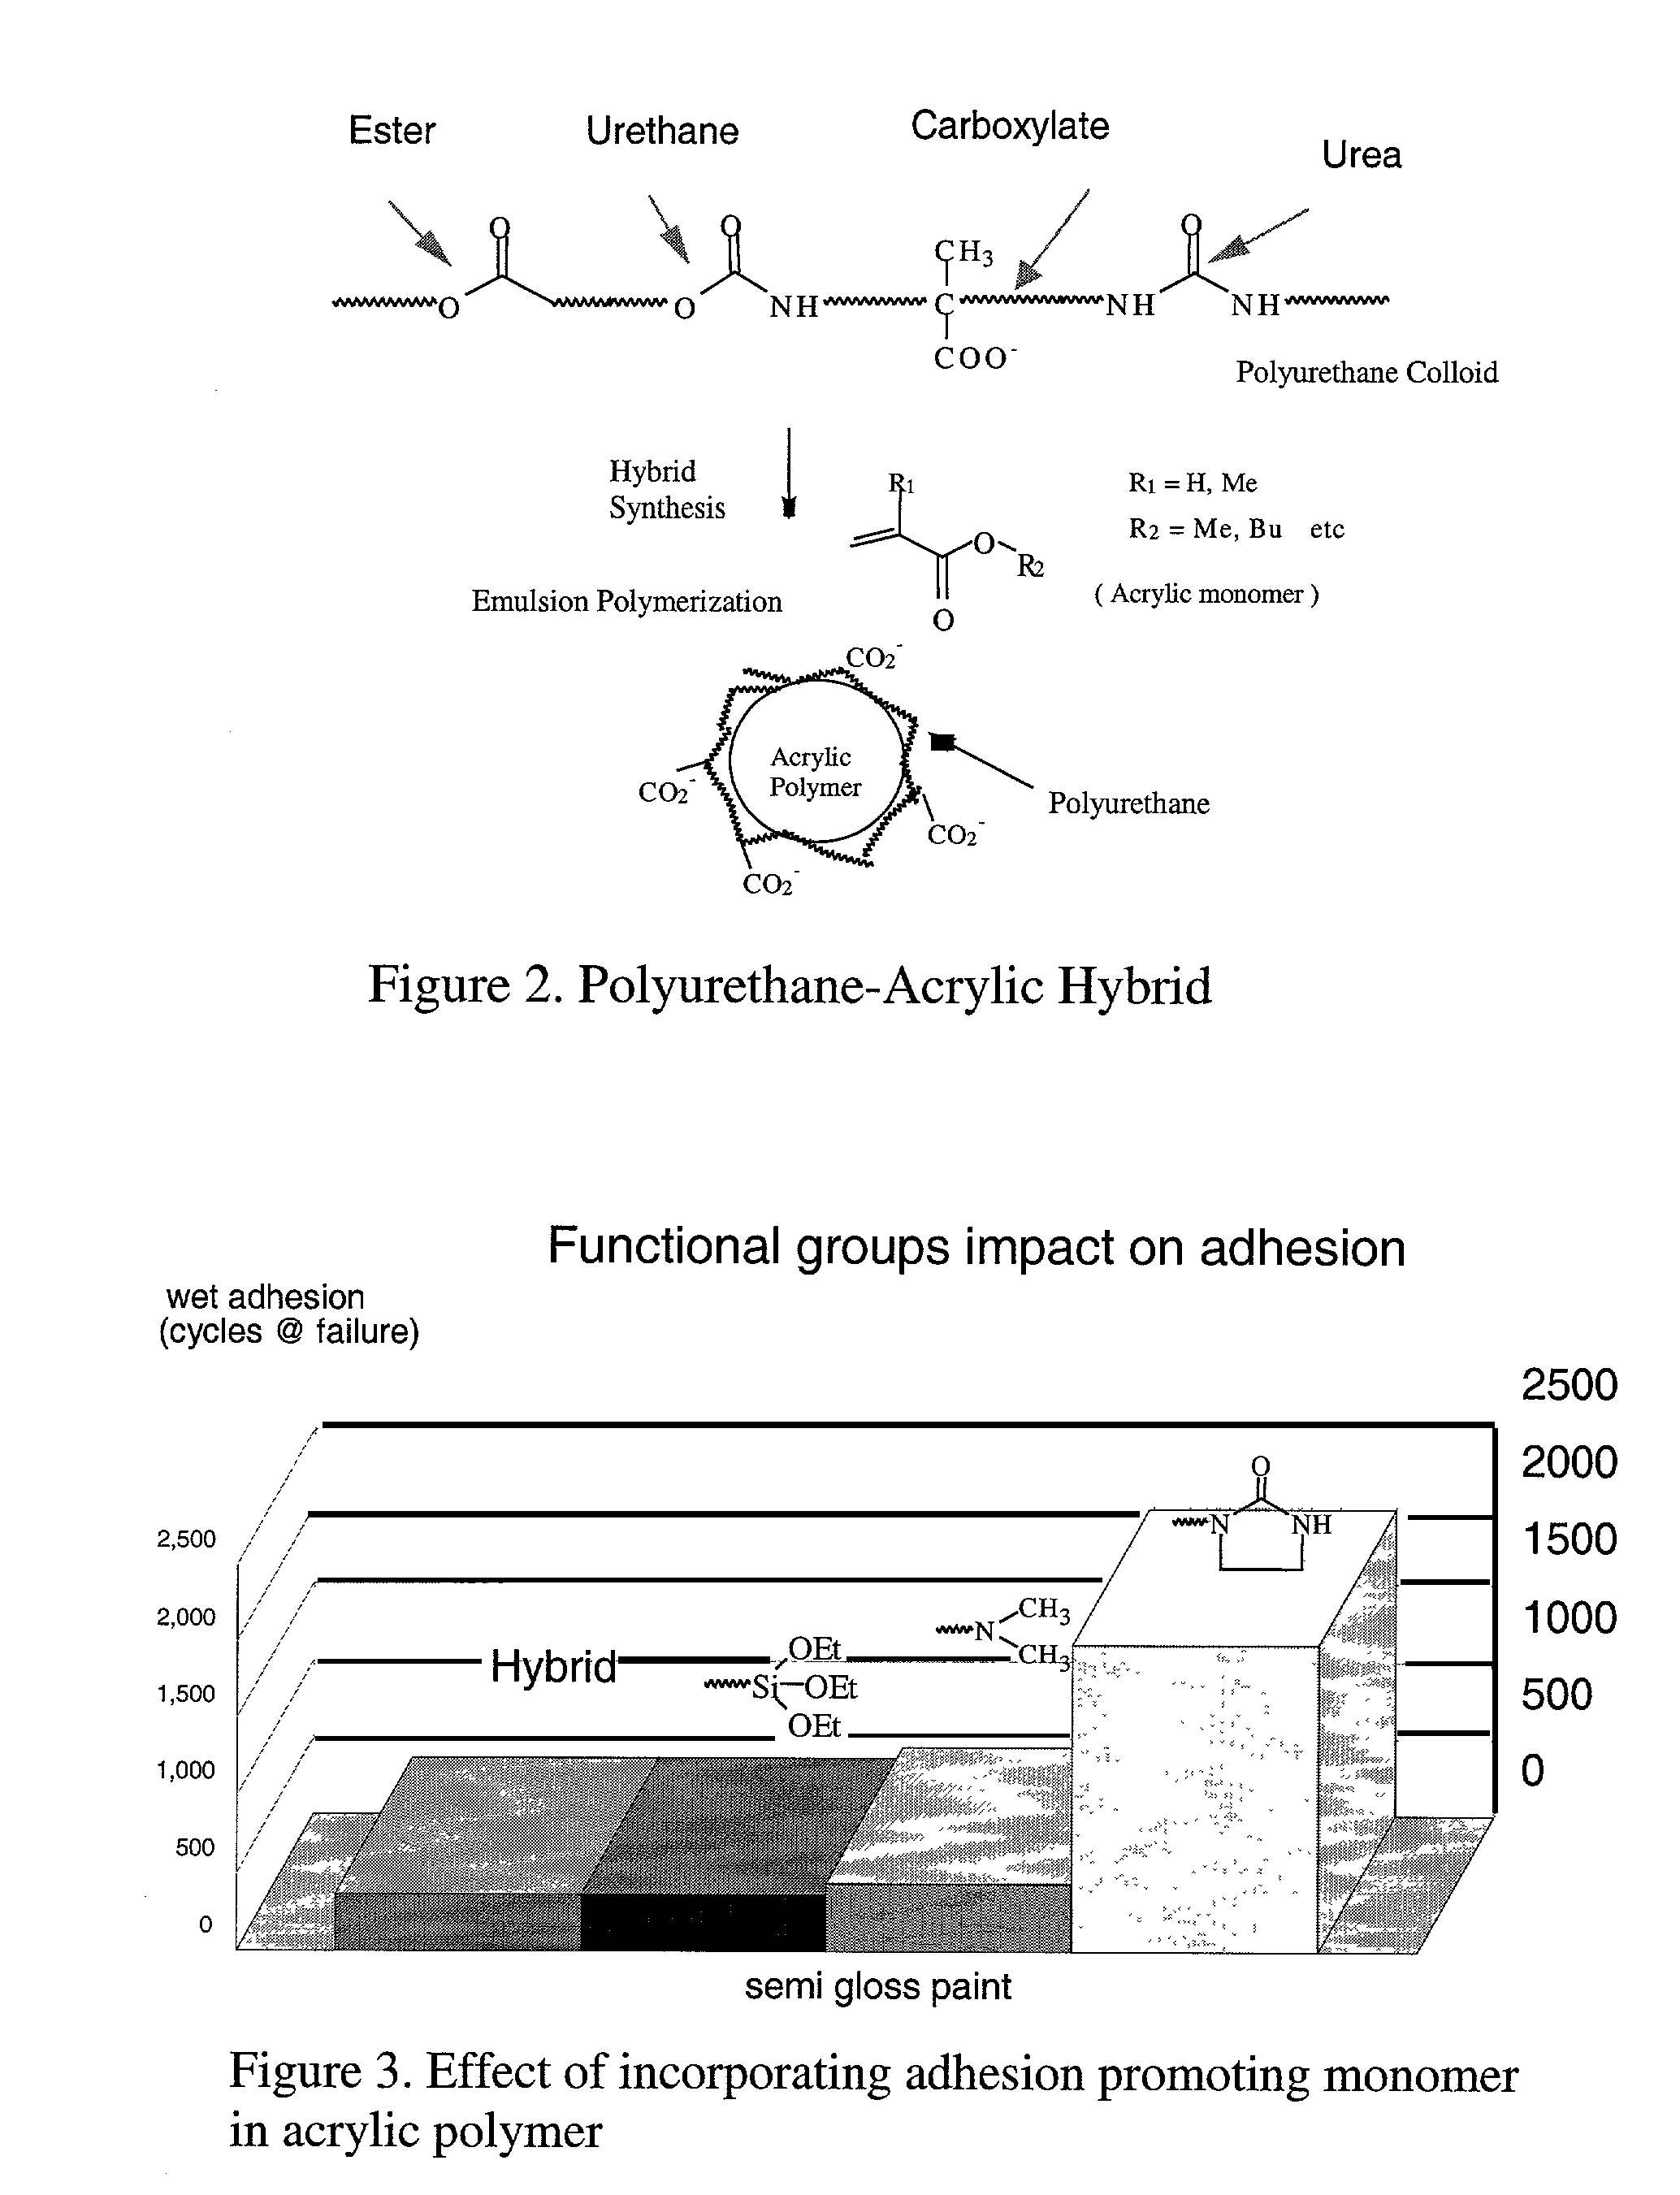 Method for predicting adhesive interactions using molecular modeling